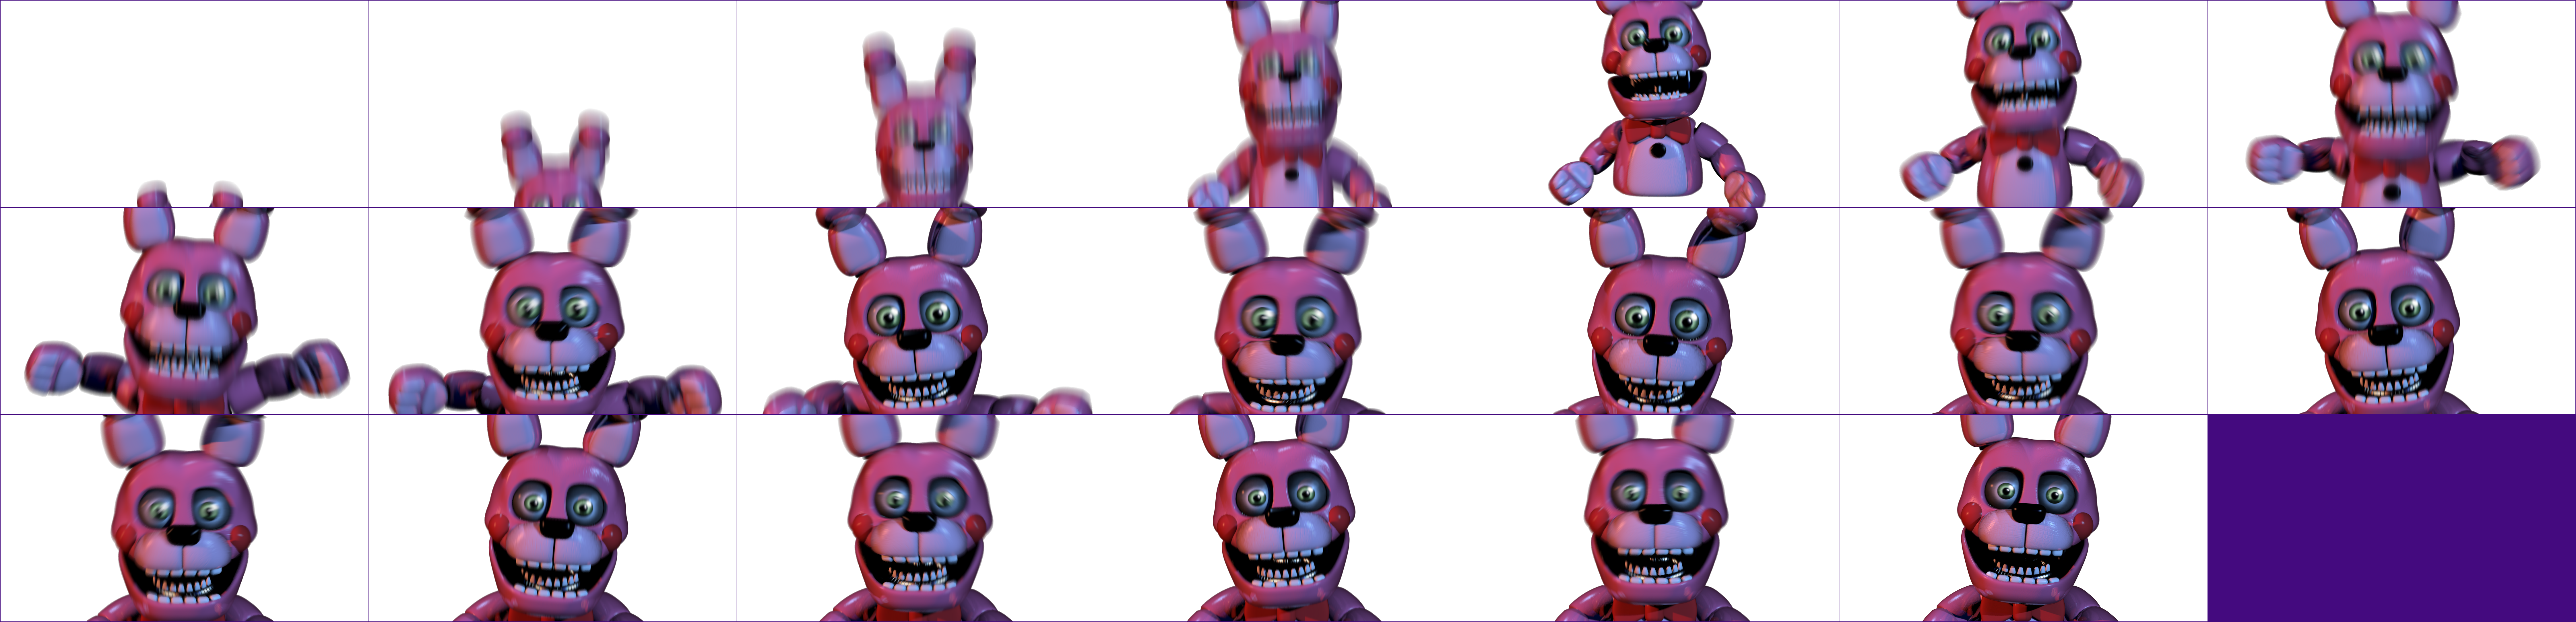 Five Nights at Freddy's: Sister Location - Bonnet